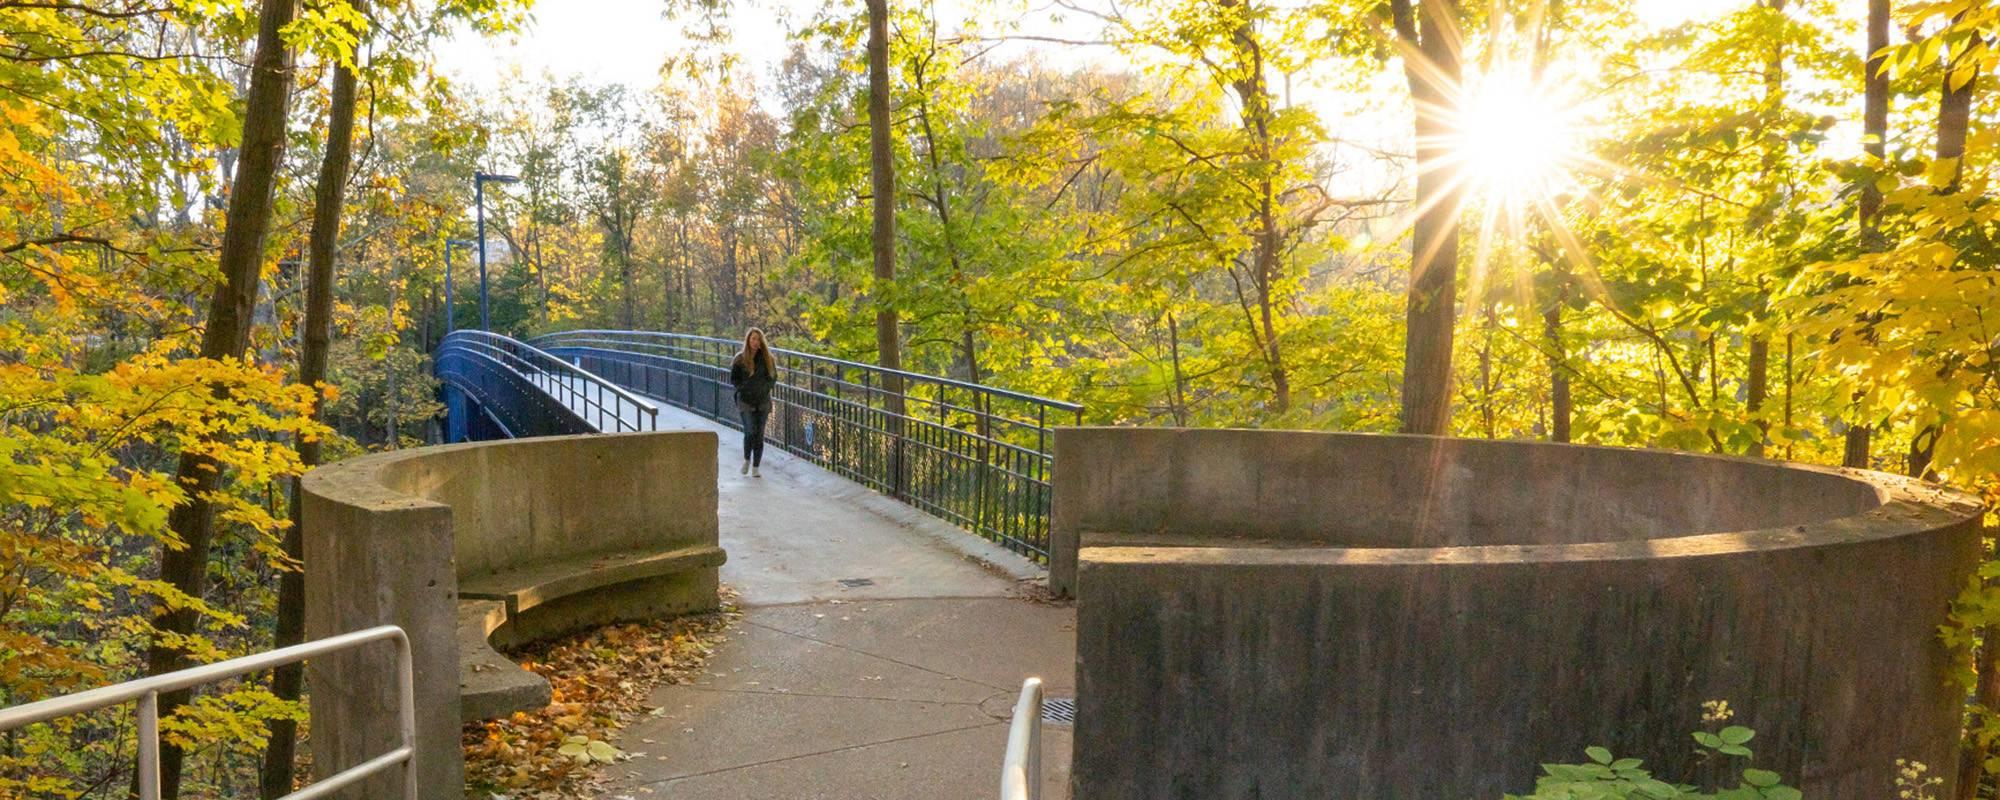 Student finding her way across the Little Mac Bridge on Grand Valley campus.